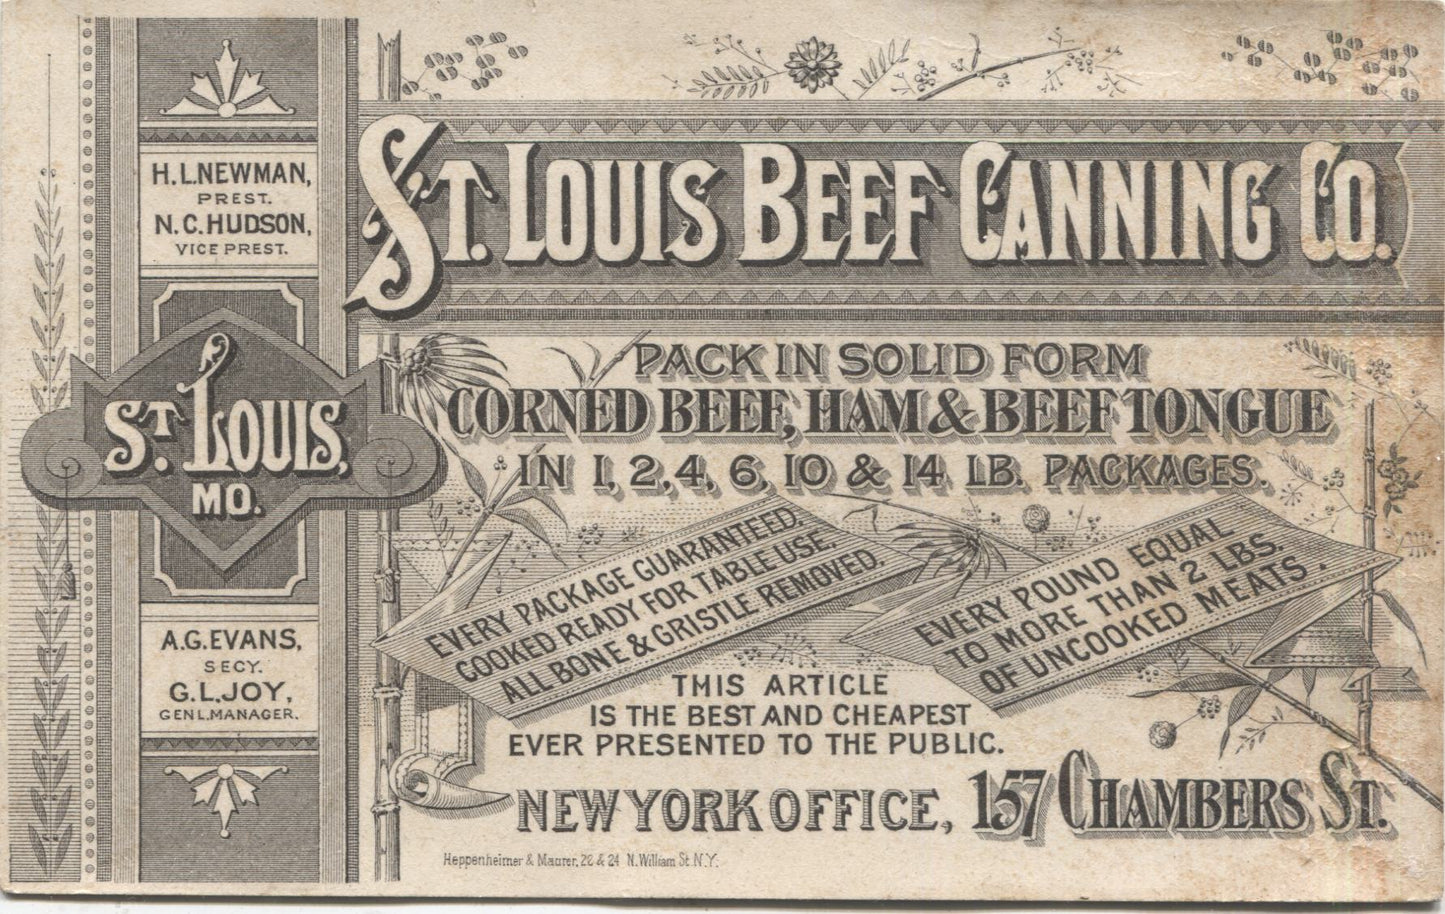 St. Louis Beef Canning Co. Antique Trade Card - 6" x 3.75"